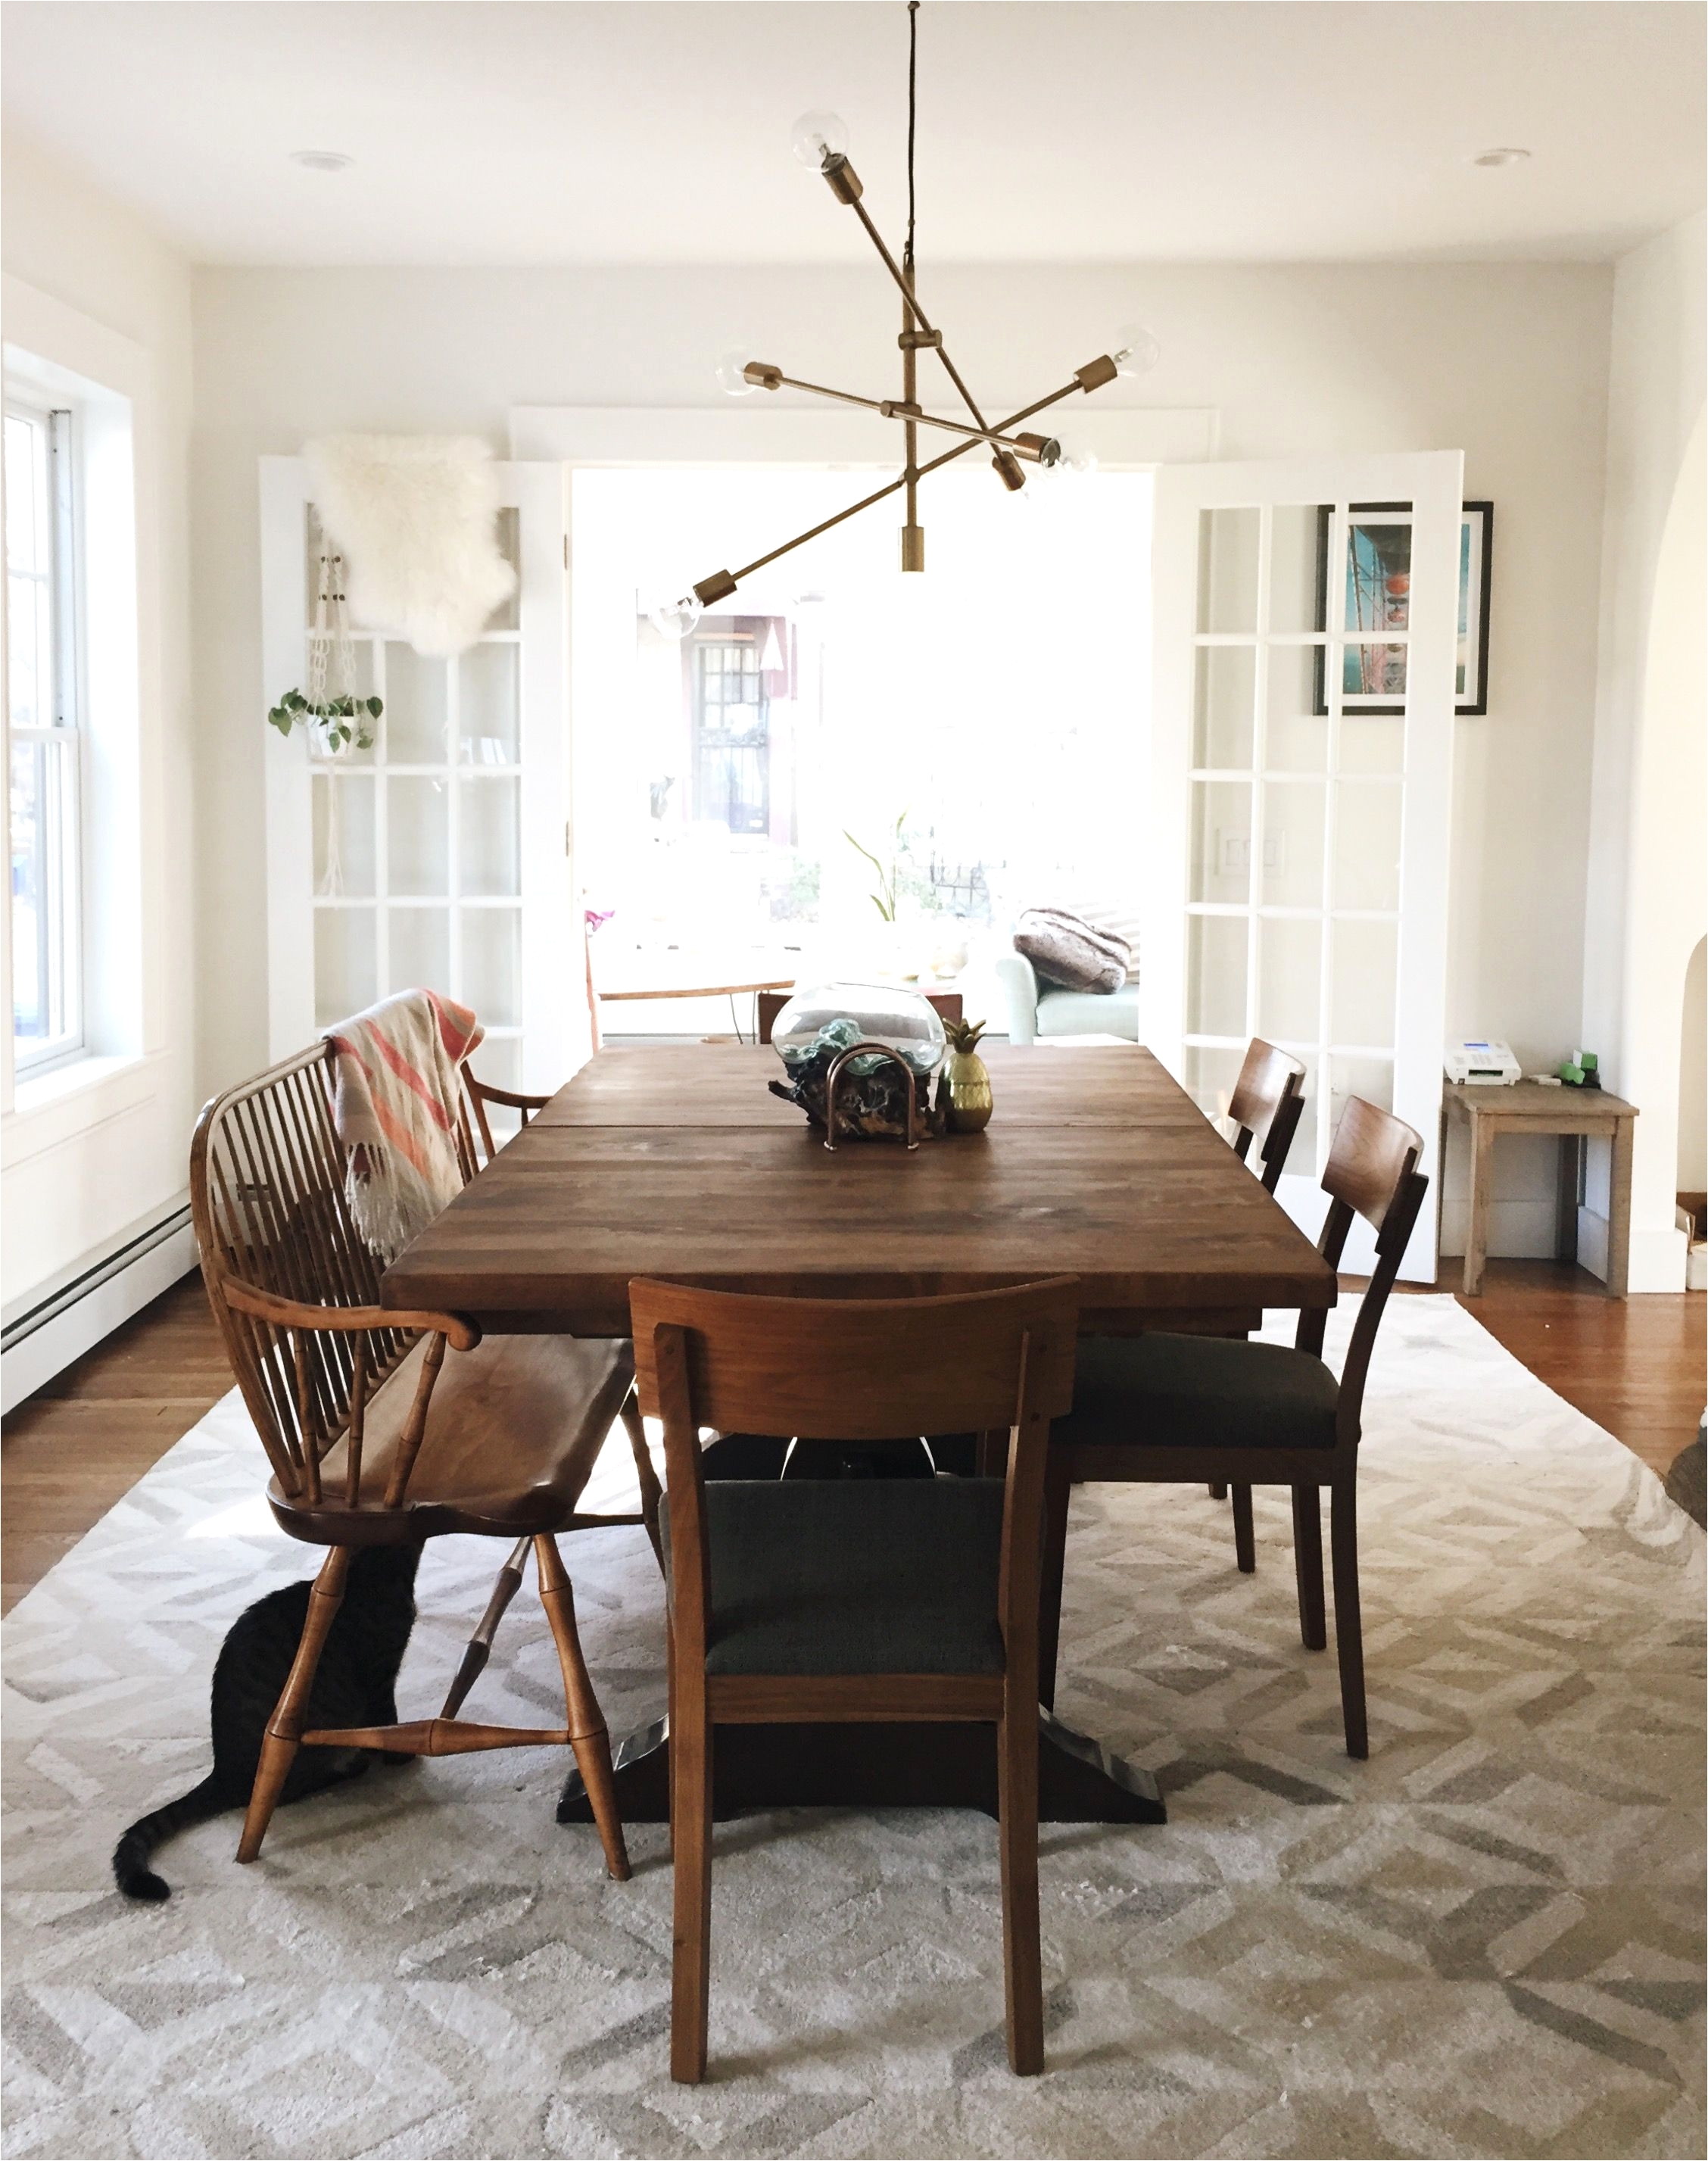 our dining room west elm marquis rug west elm mobile pendant endearing dining room table craigslist